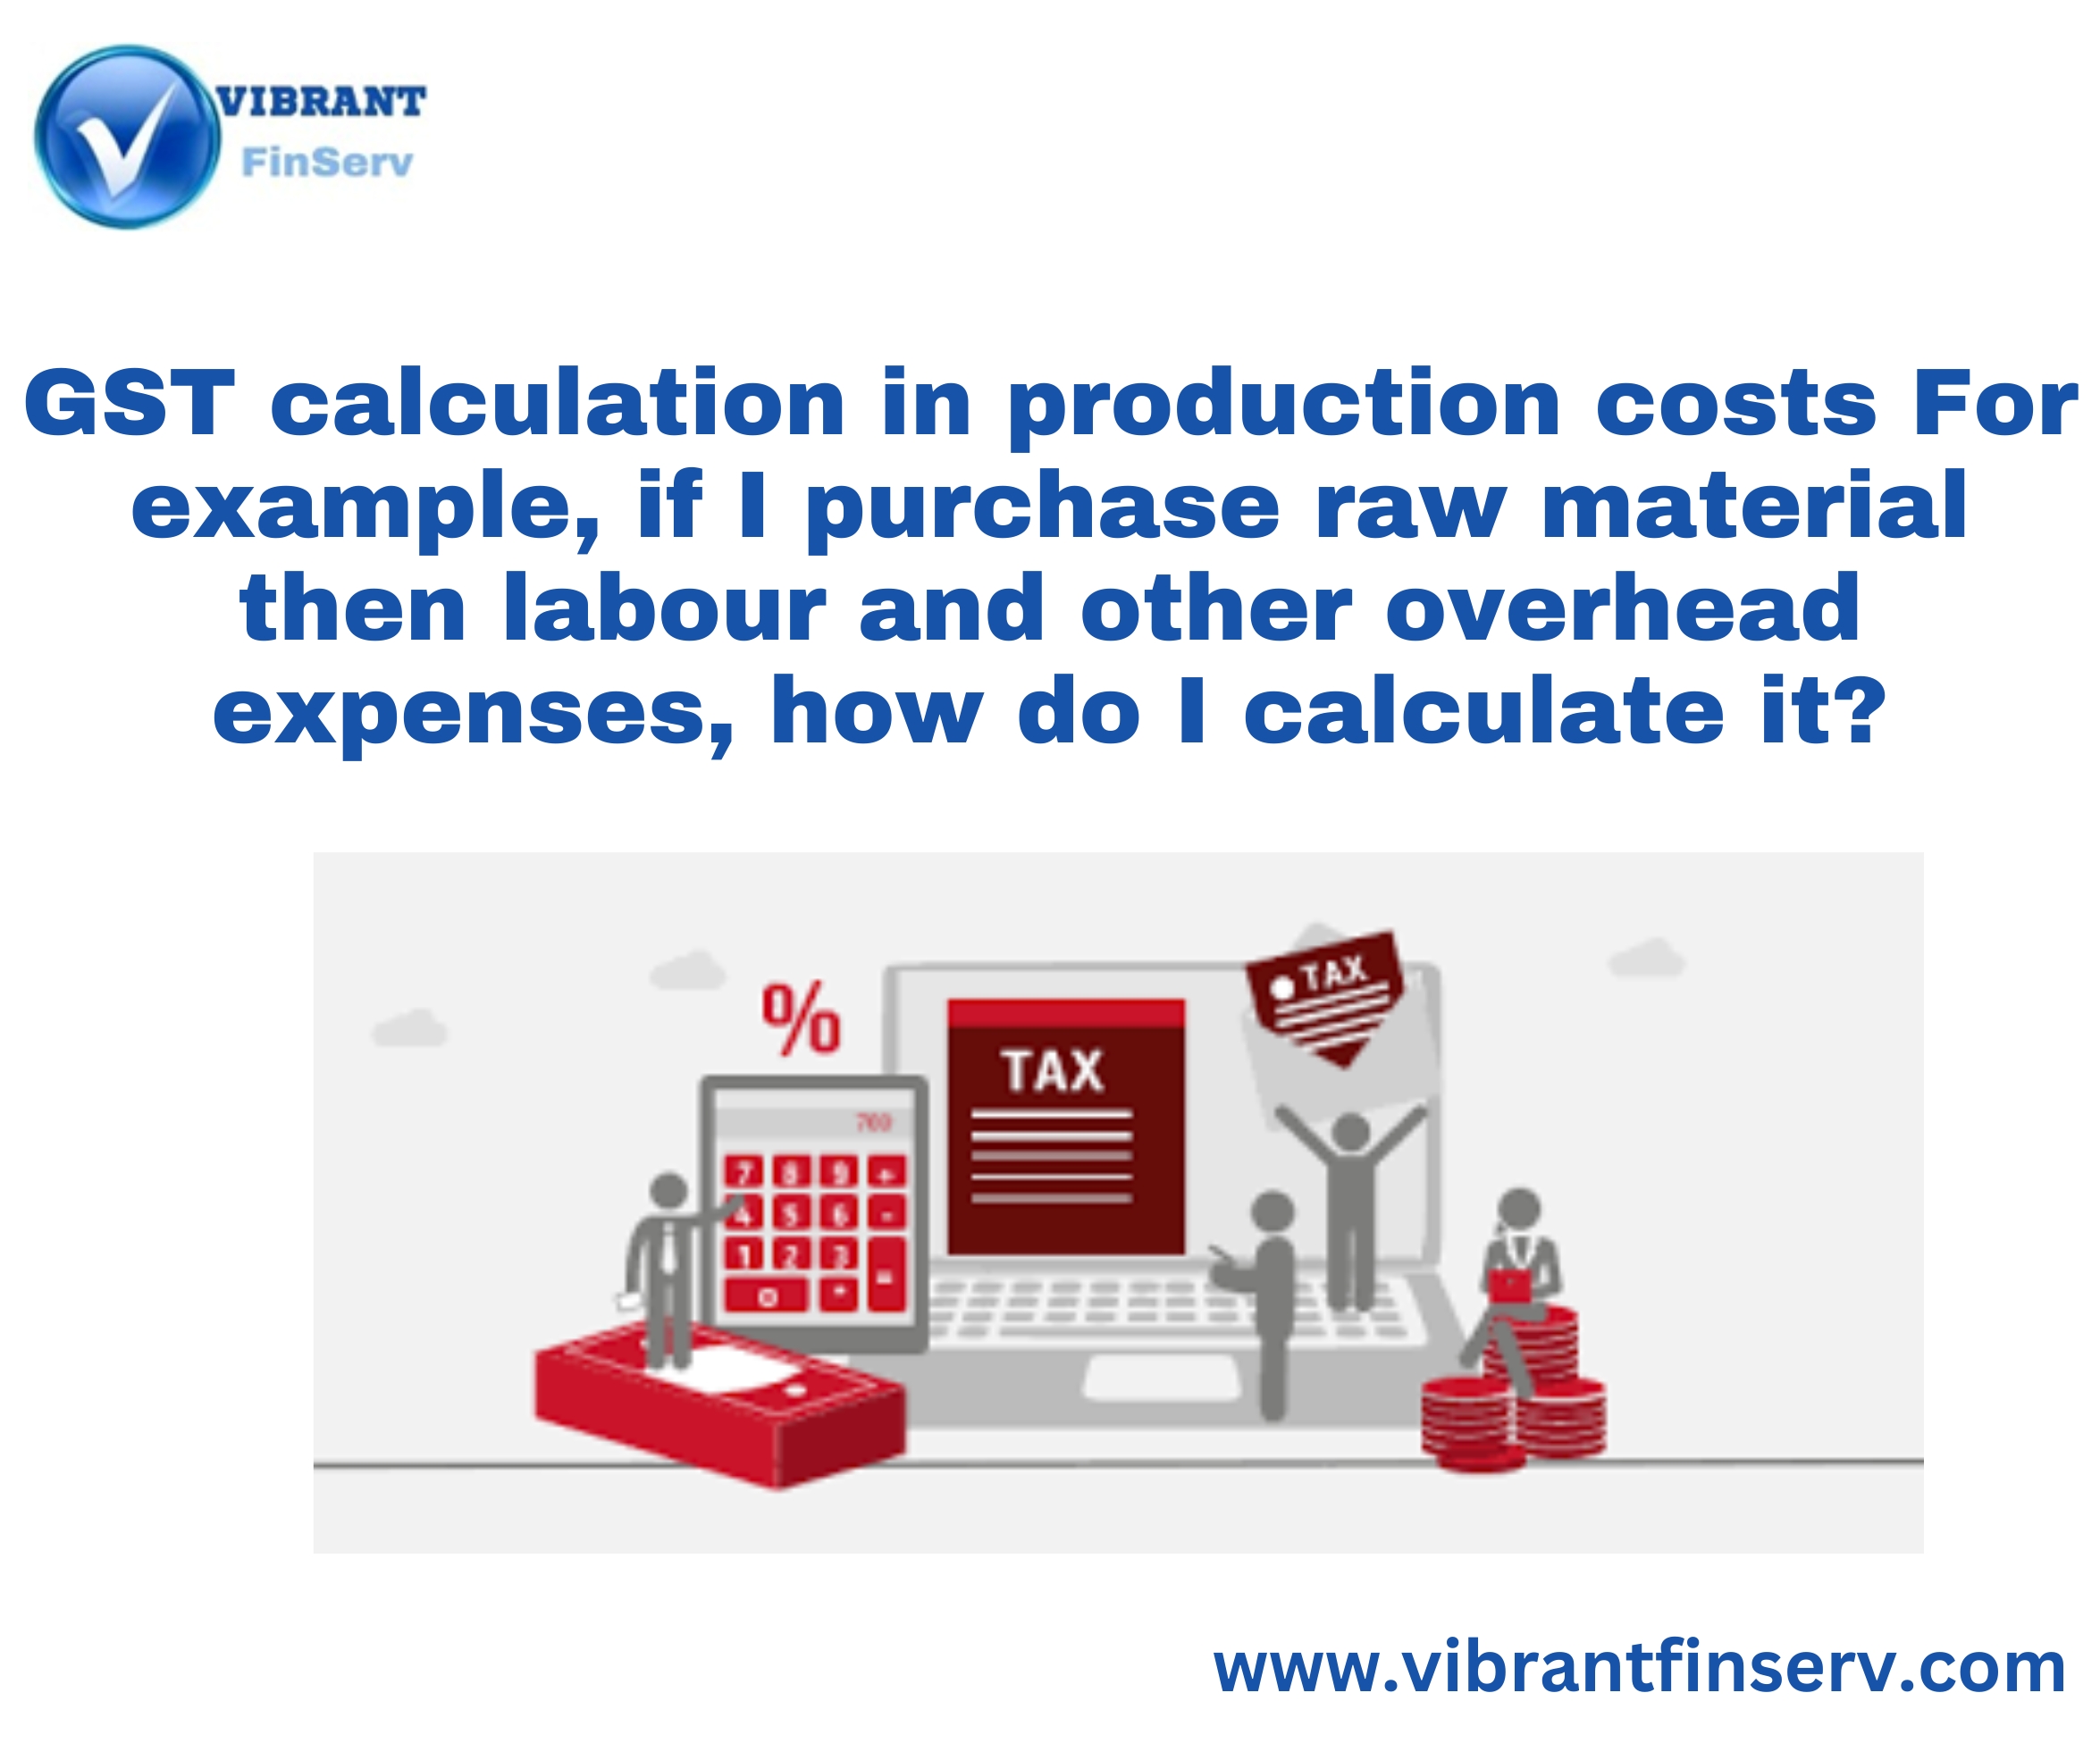 GST calculation in production costs